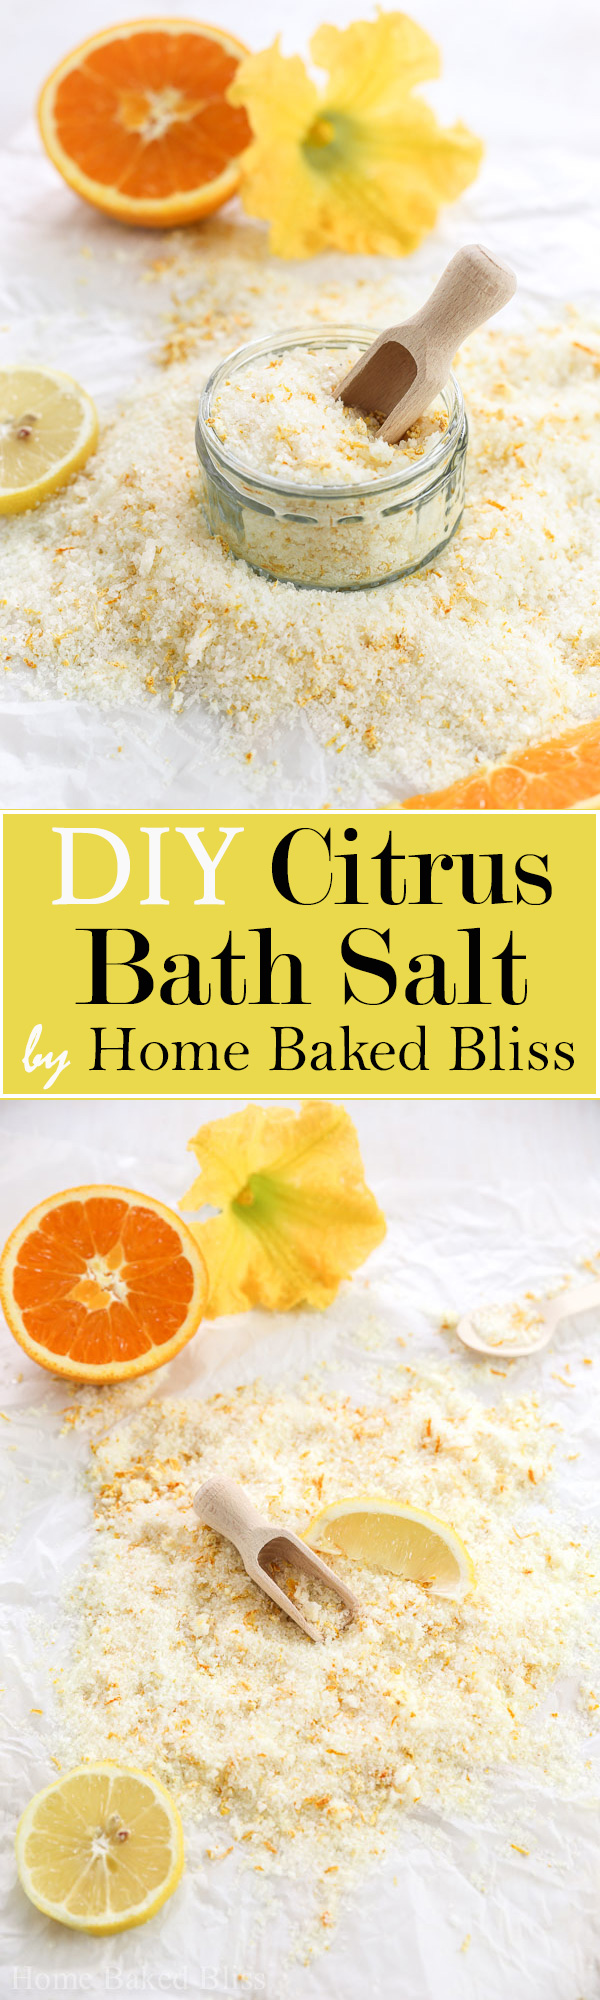 This Citrus Bath salt is a refreshing add-in for your next bath. Contains epsom salt for hydrated skin and lemon and orange essential oils.